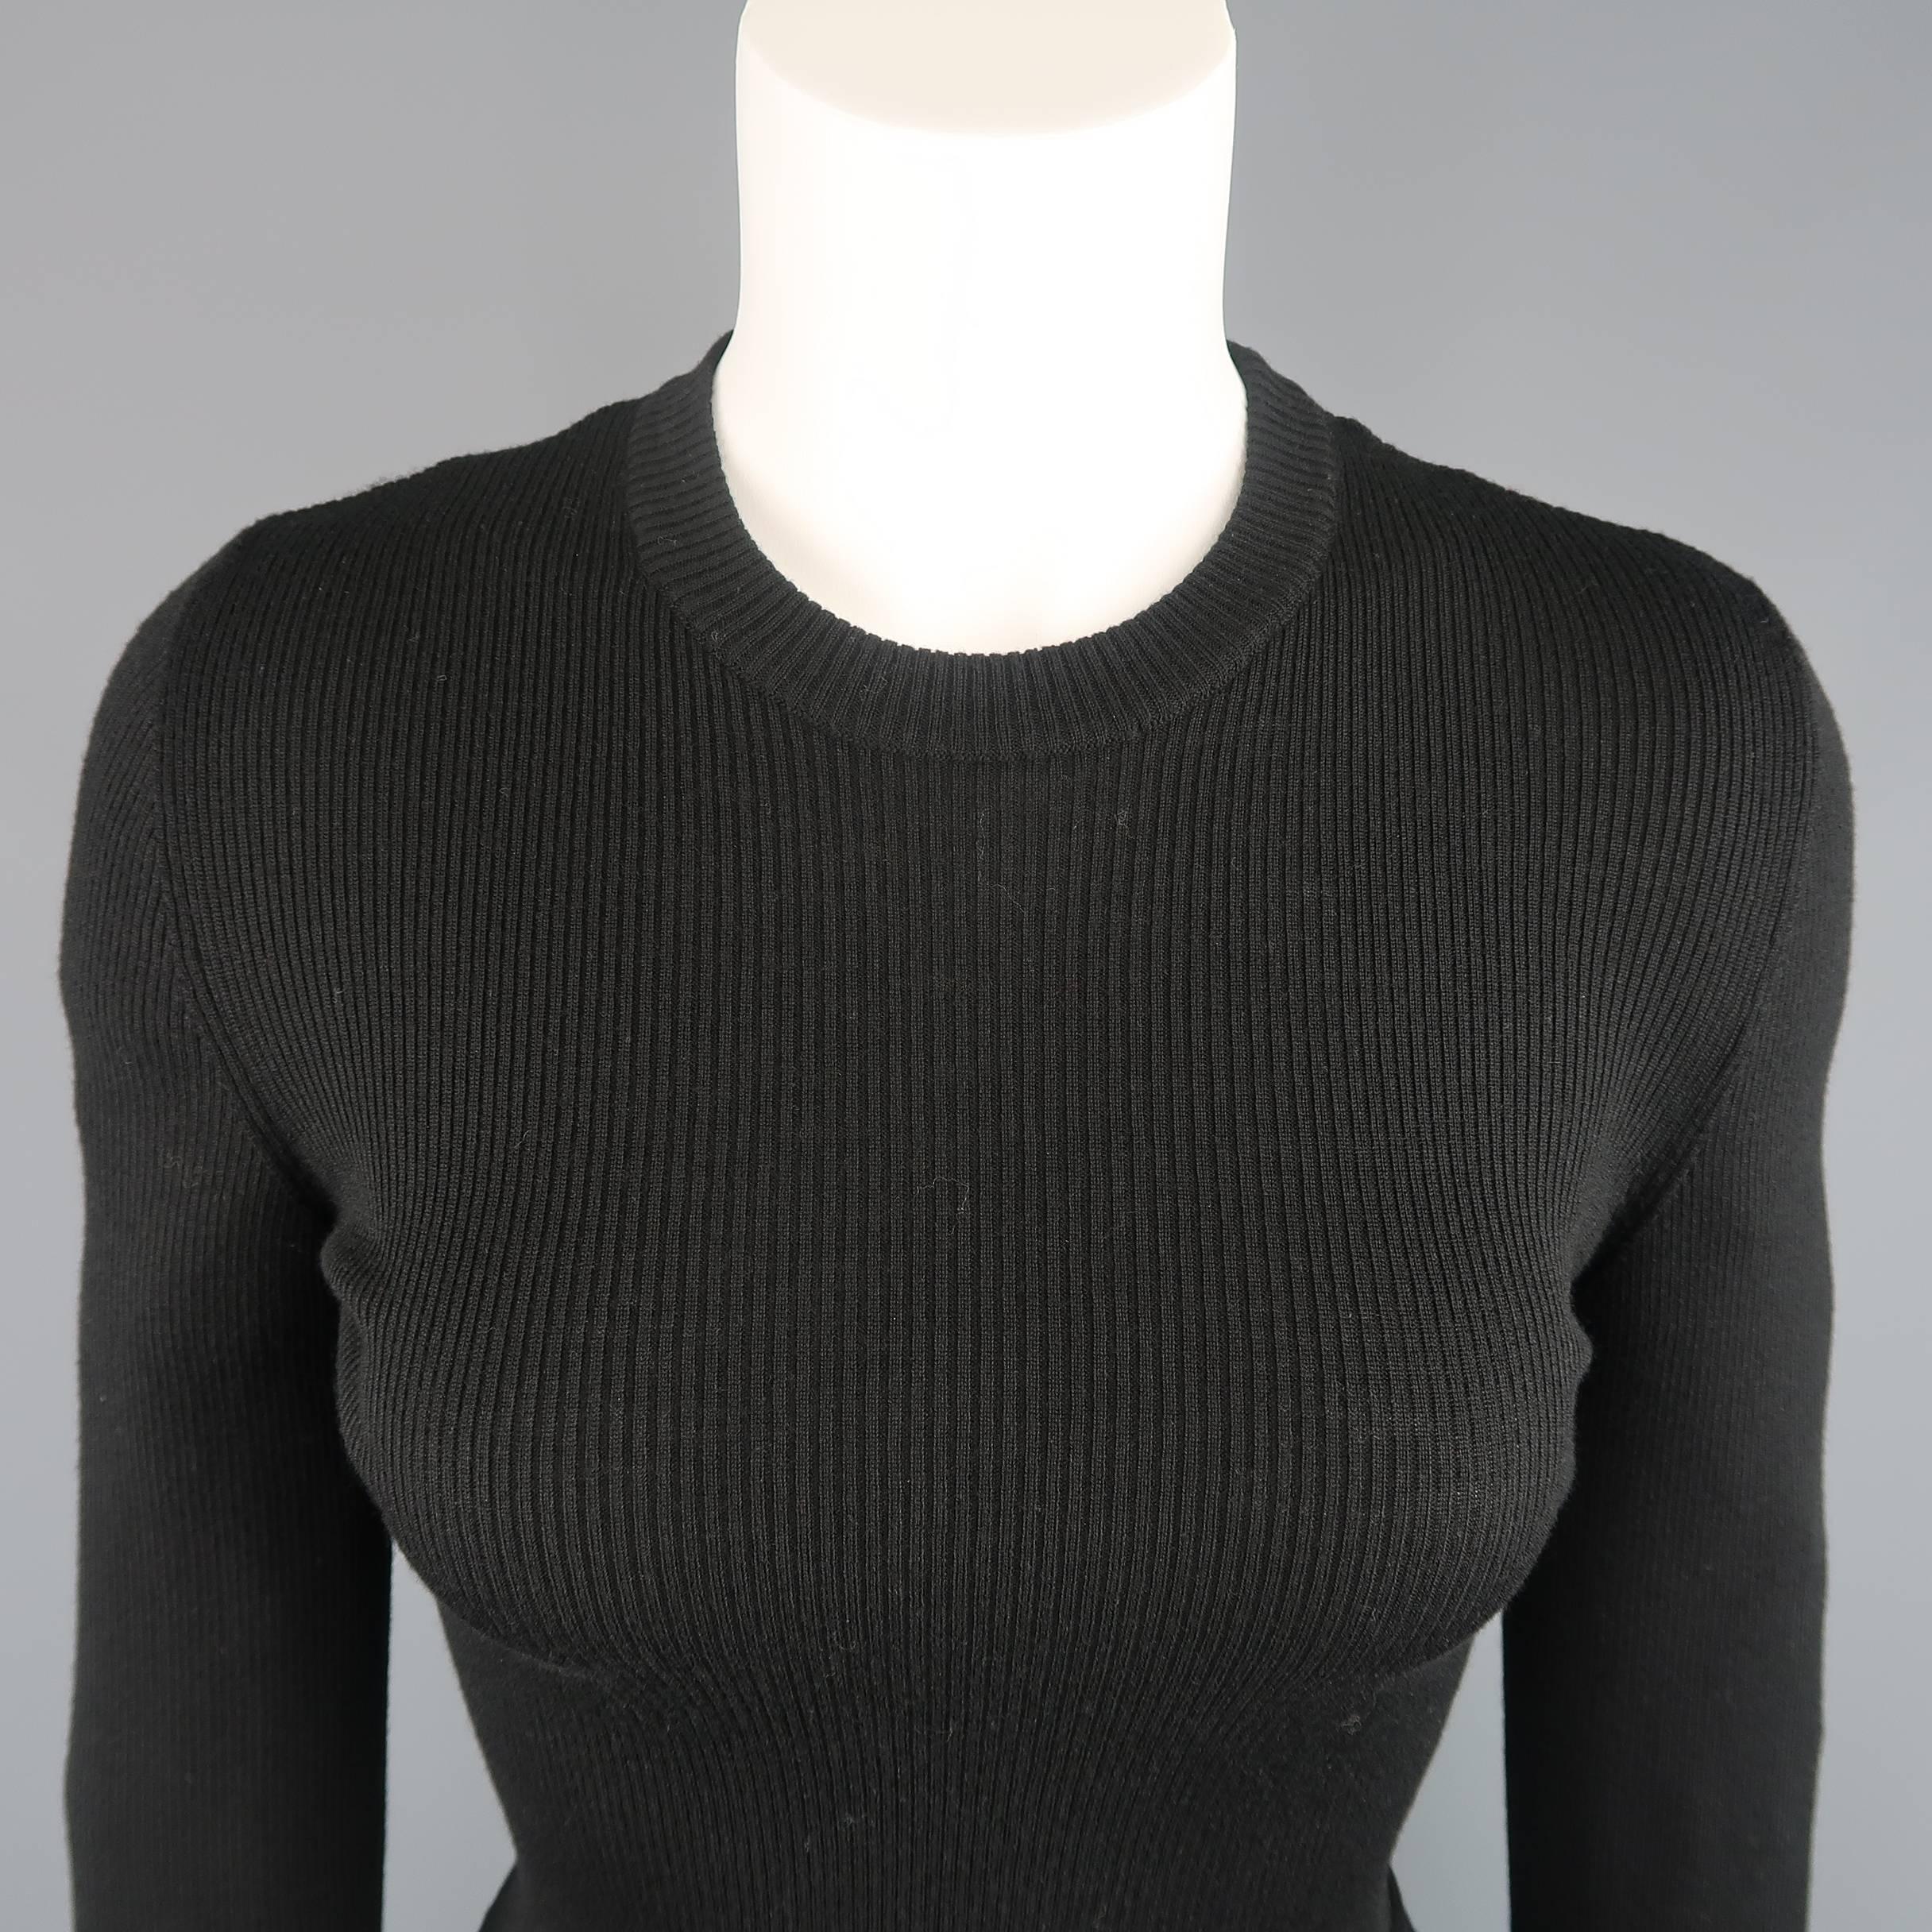 SALVATORE FERRAGAMO pullover sweater comes in a virgin wool ribbed knit and features a crewneck, long sleeves, and asymmetrical, directional knit peplum hem.  Made in Italy.
 
Excellent Pre-Owned Condition.
Marked: M
 
Measurements:
 
Shoulder: 16